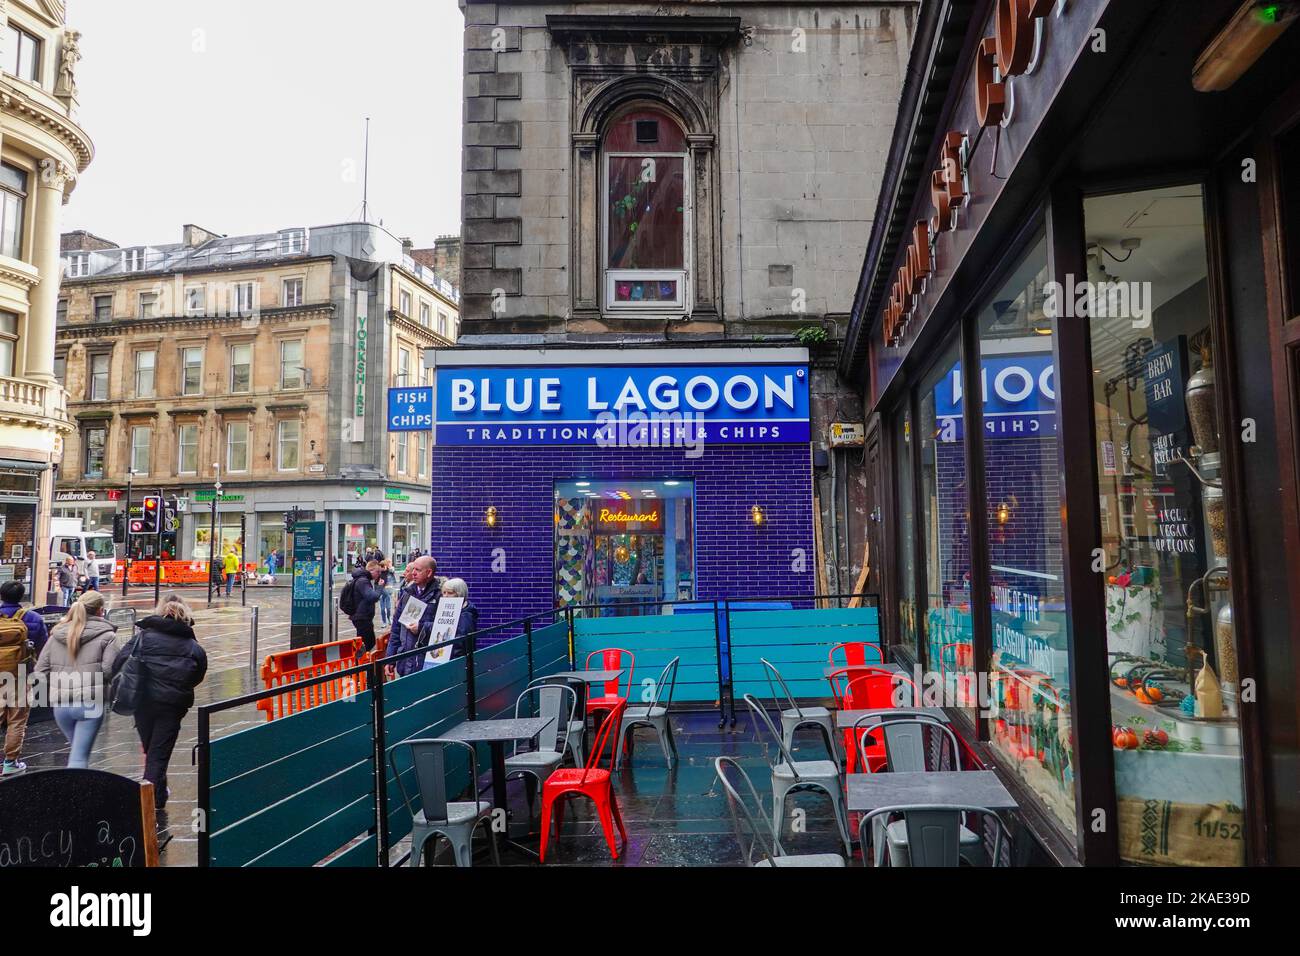 Street scene, Blue Lagoon Fish & Chips, on Gordon Street, outside Central Station with people walking, standing in light rain, Glasgow, Scotland. Stock Photo